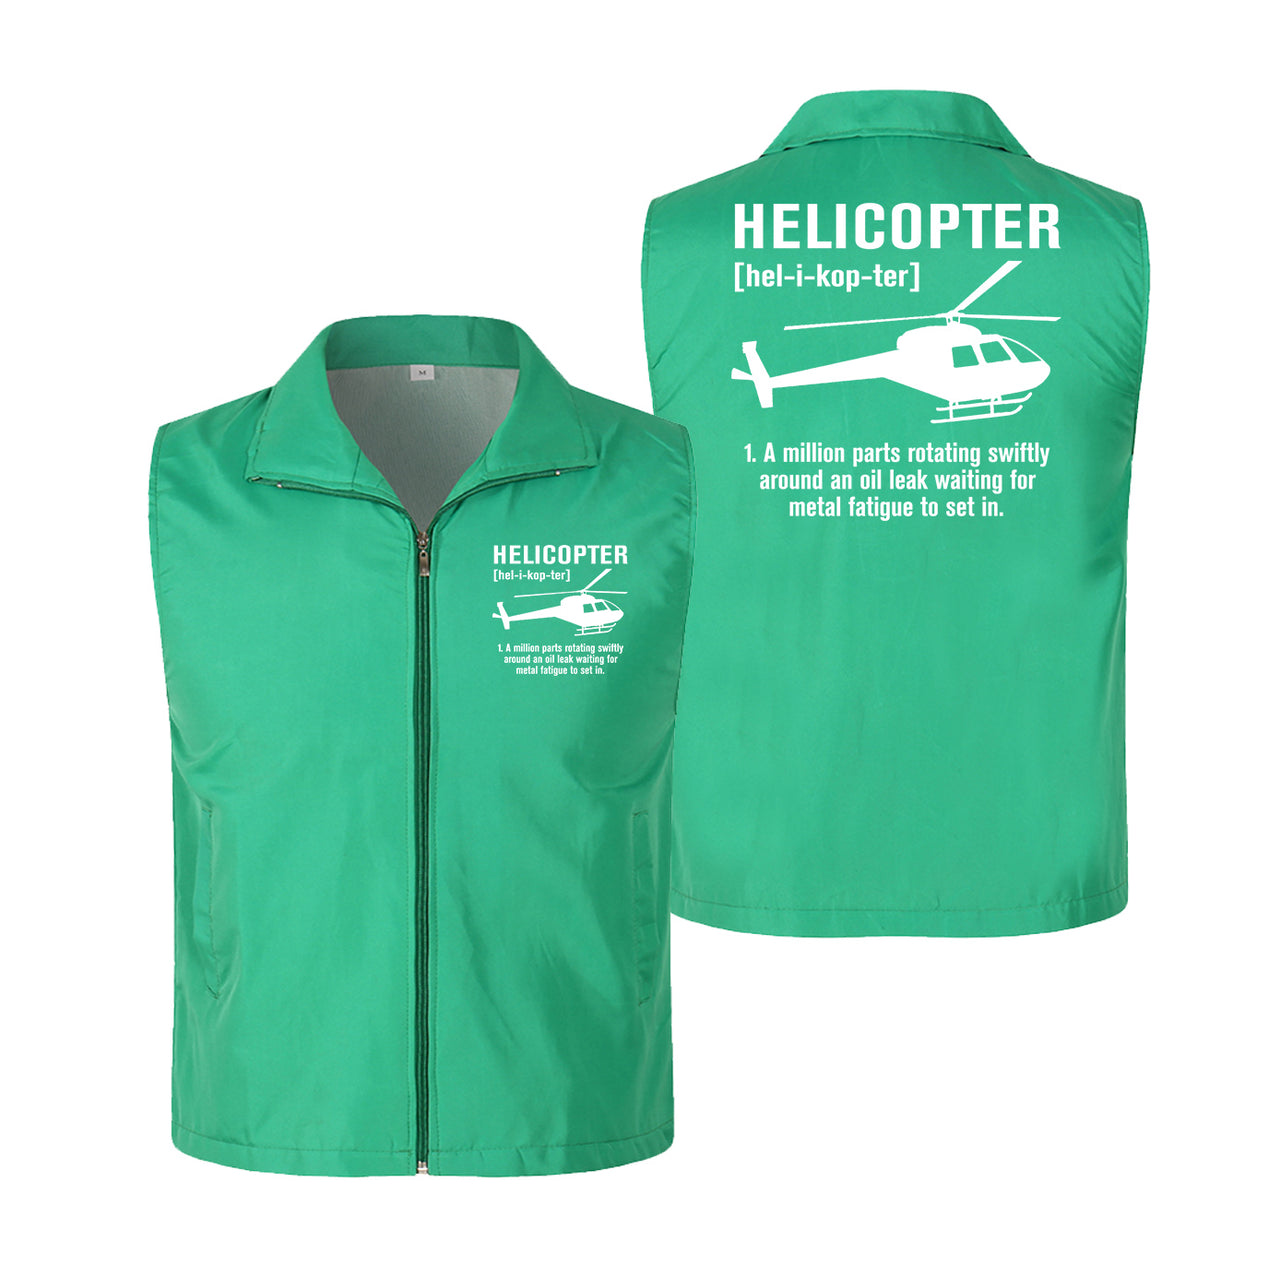 Helicopter [Noun] Designed Thin Style Vests